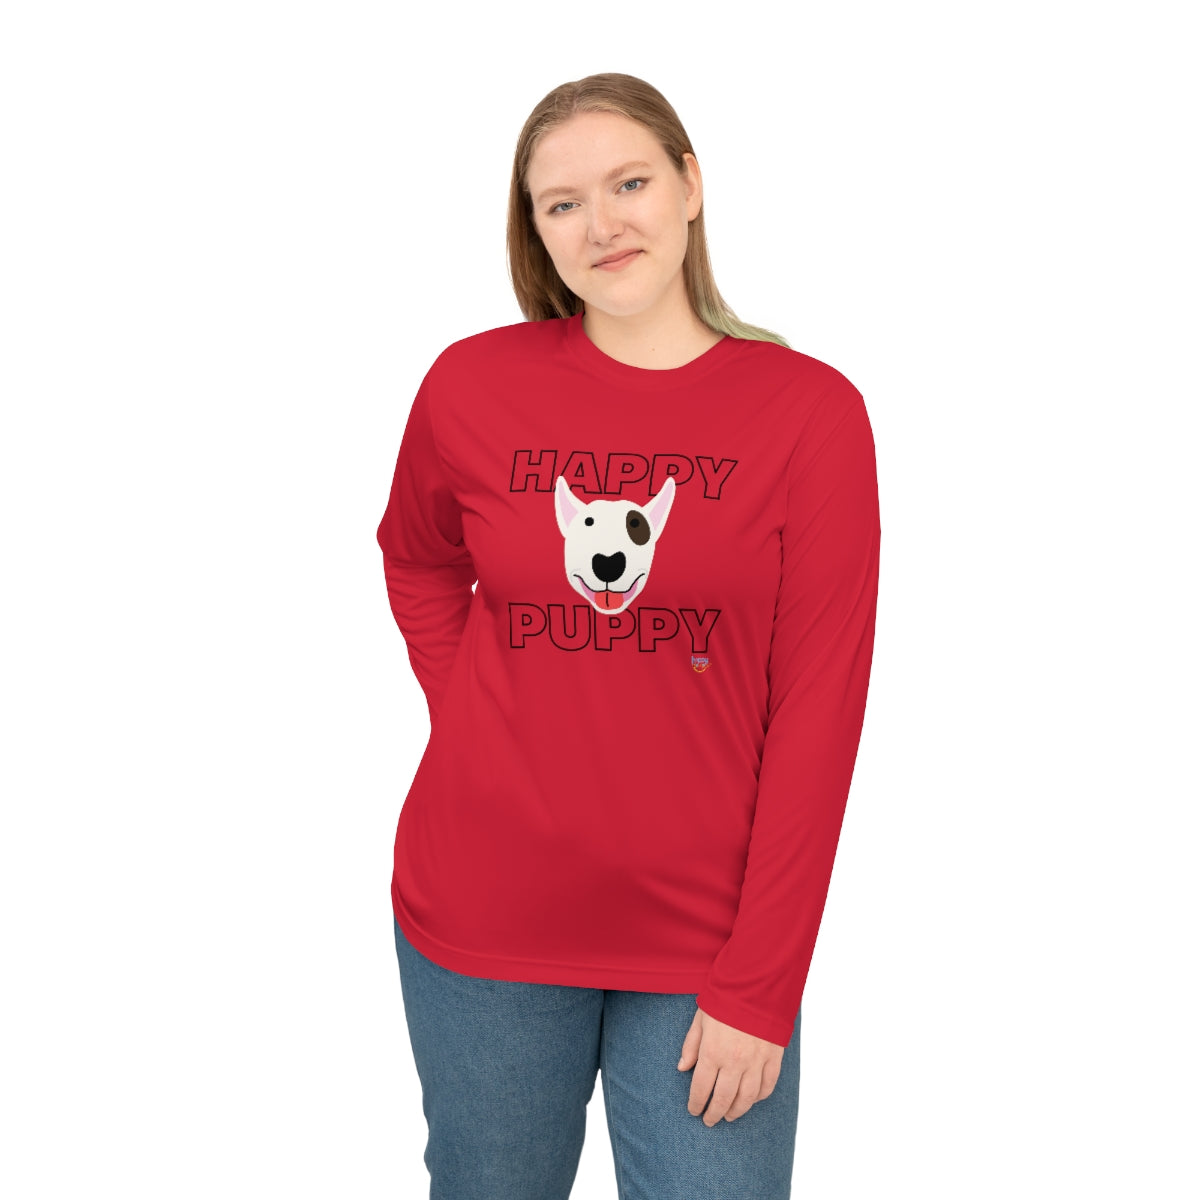 BULL TERRIER HAPPY PUPPY  Unisex Performance Long Sleeve Shirt (3 colors)